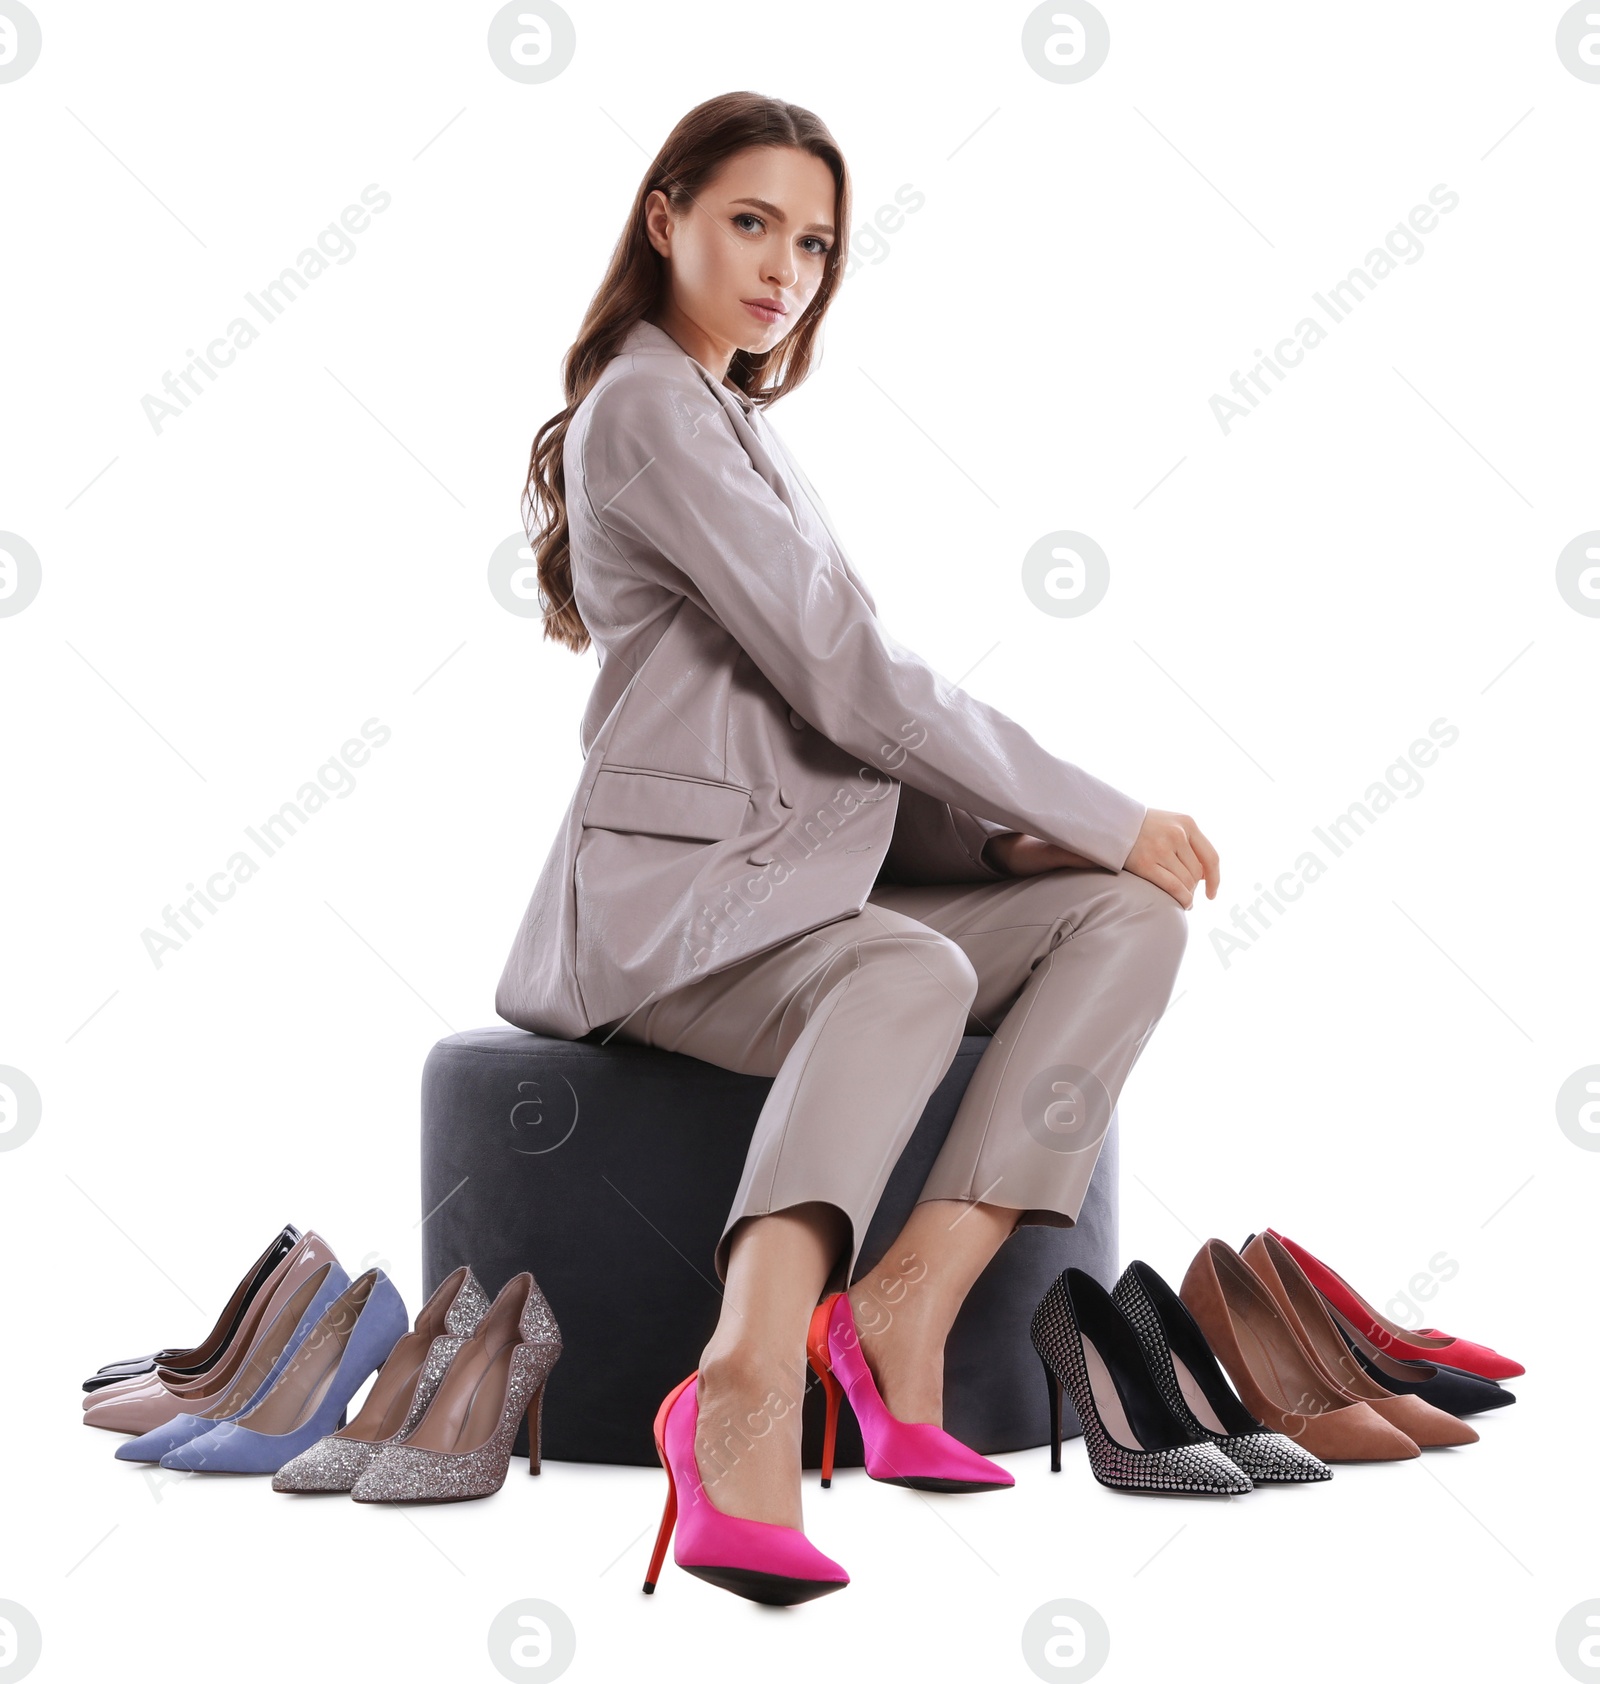 Photo of Fashionable young woman with many different high heel shoes on white background